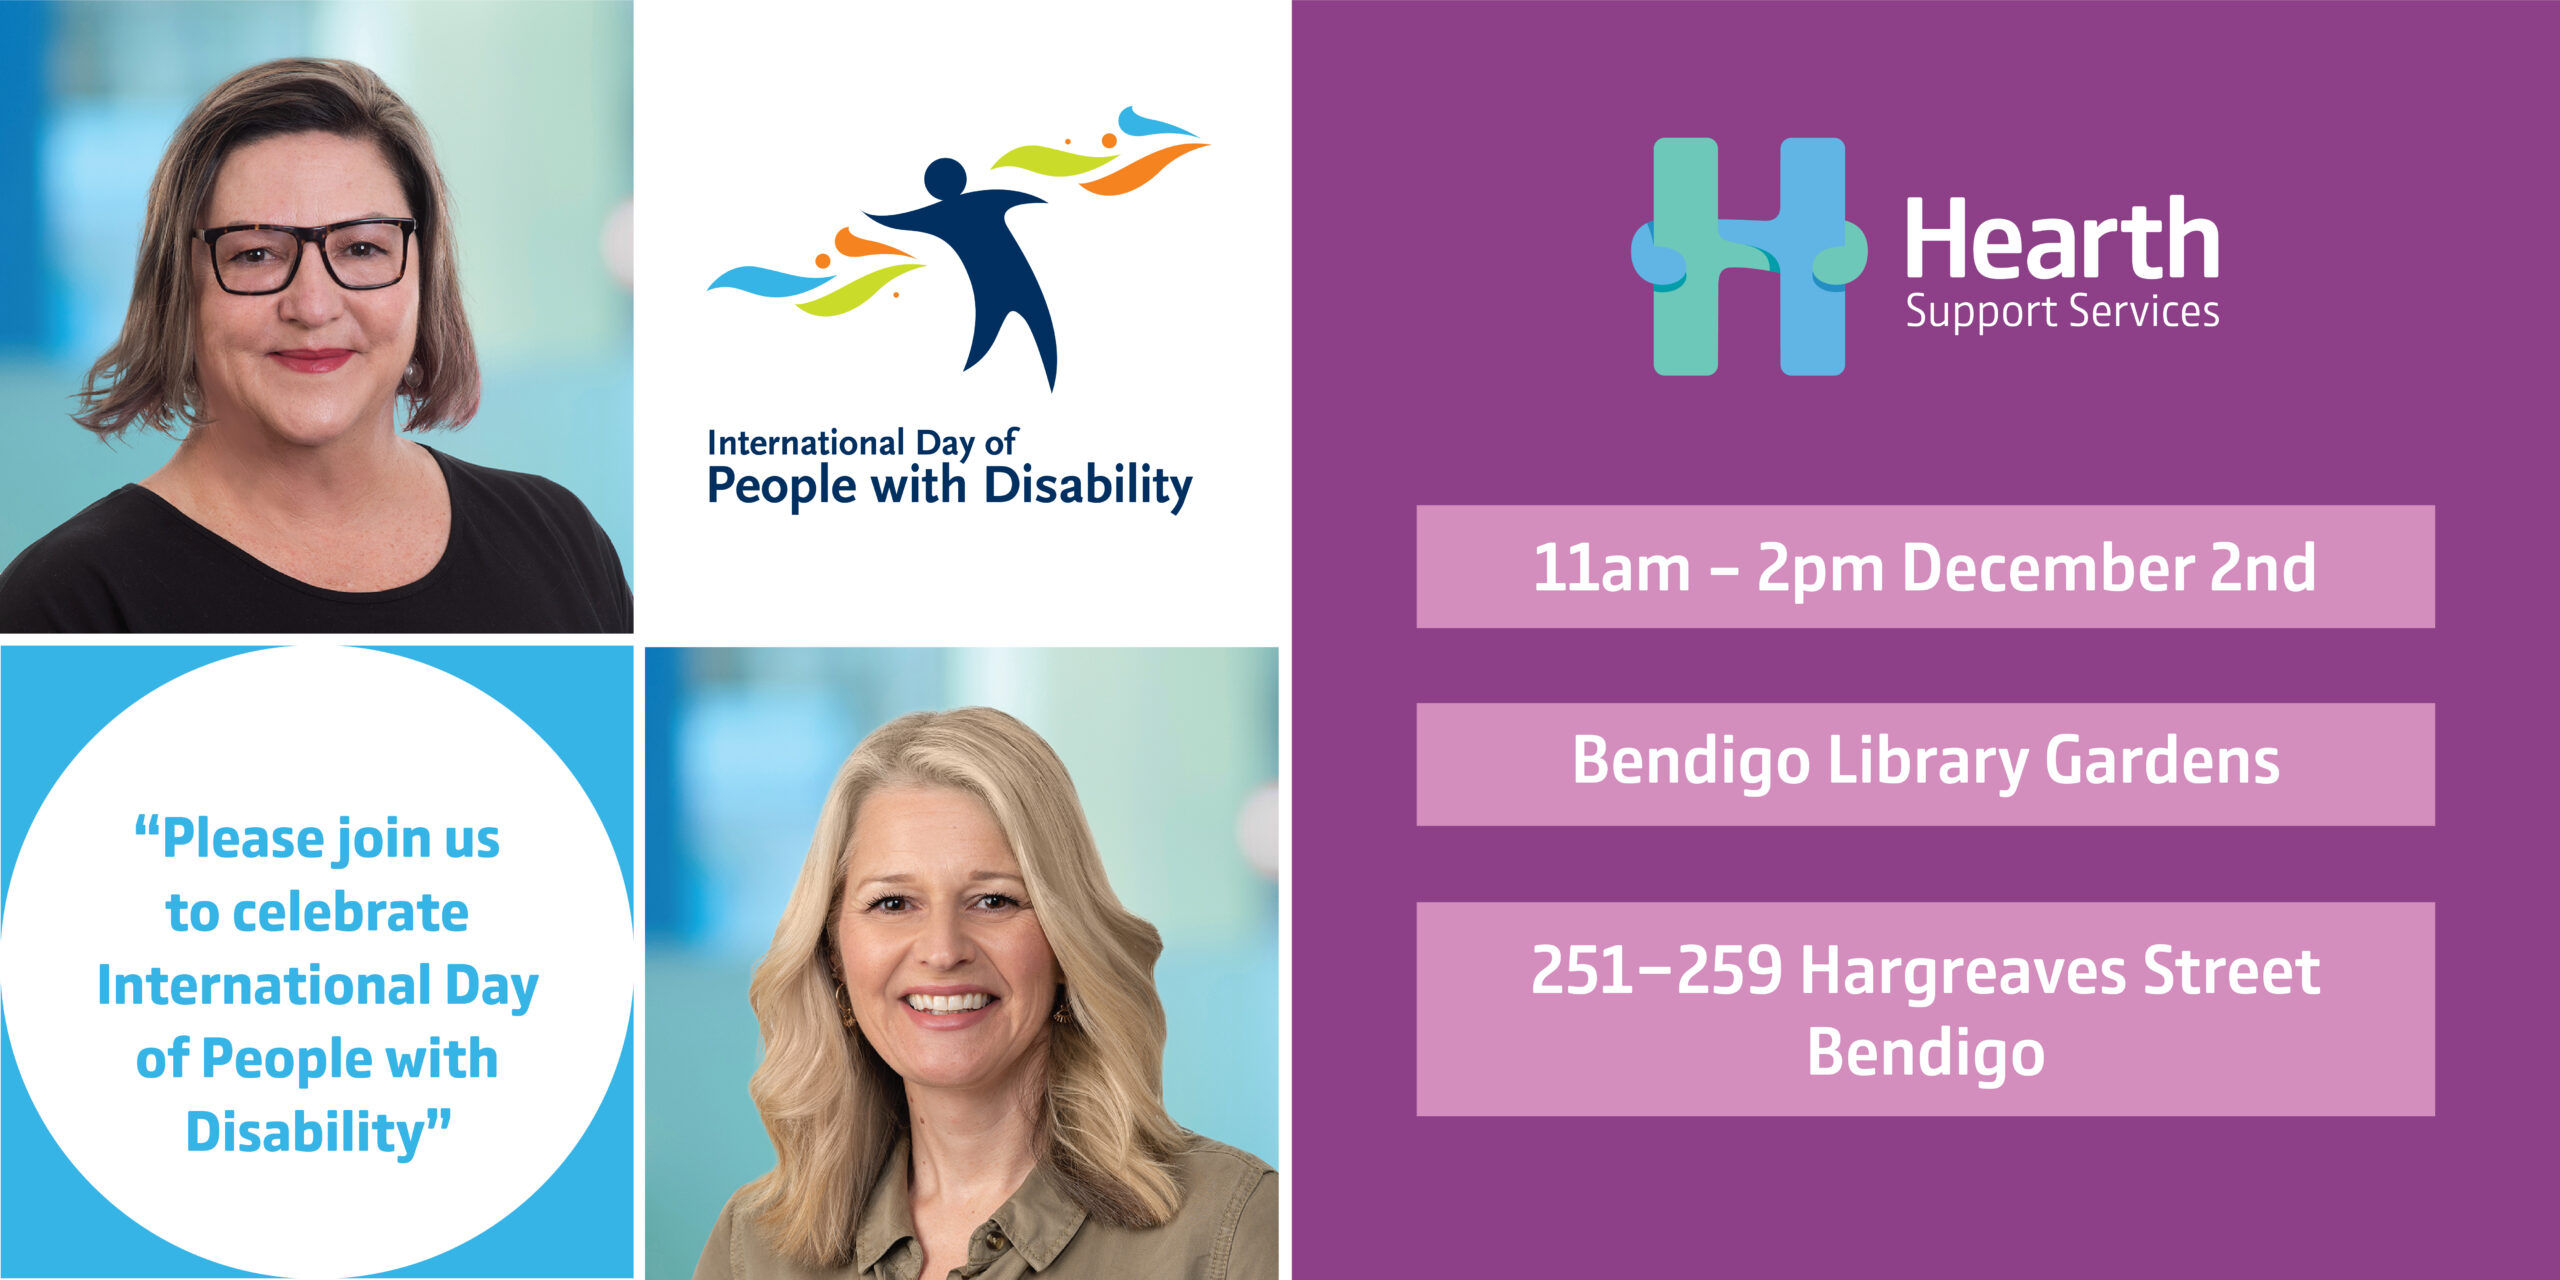 Hearth Support Services joins the Bendigo Community in celebrating International Day of People with Disability.